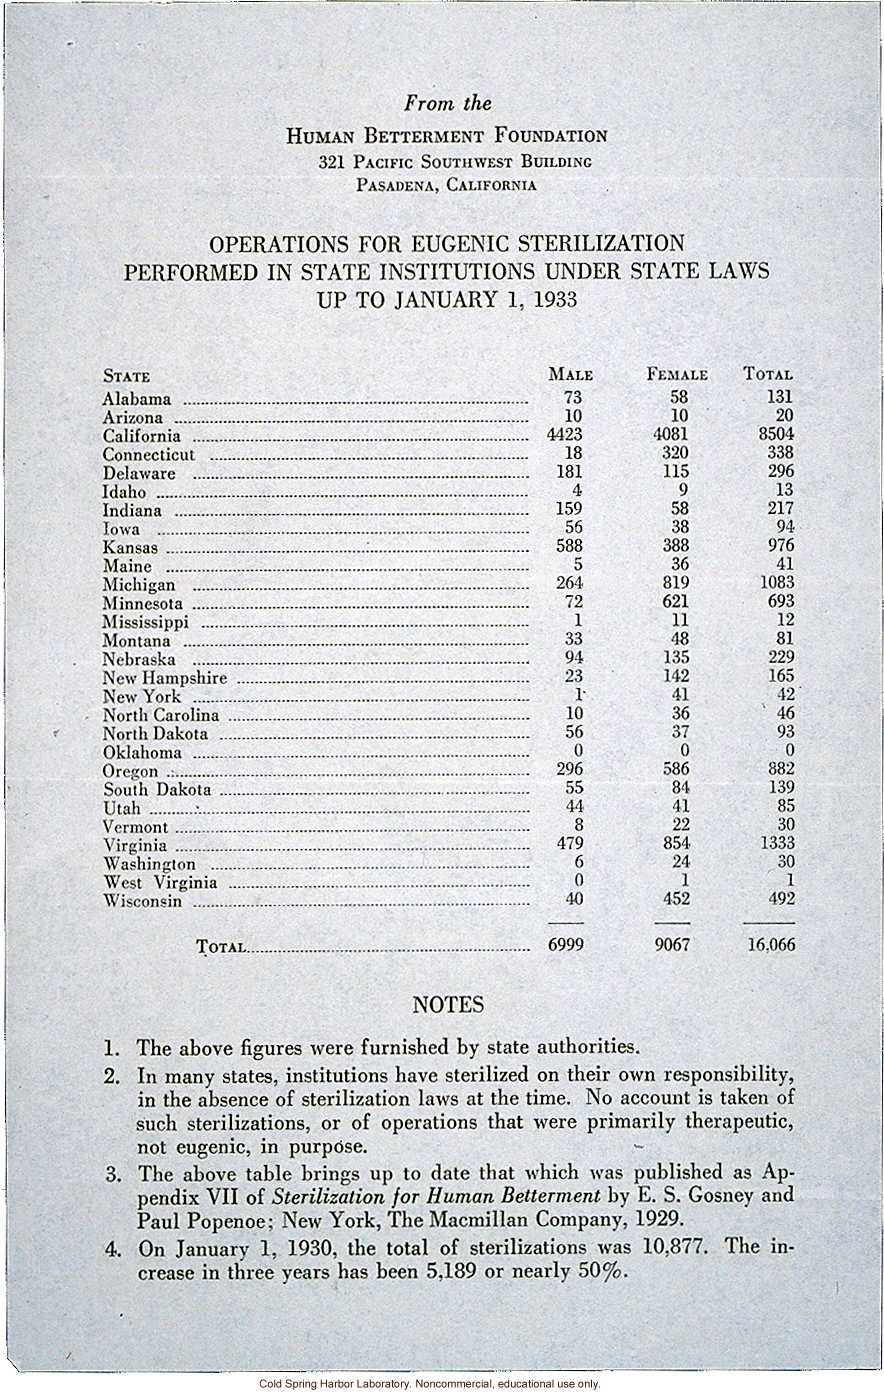 Eugenic Sterilizations (total) performed in US through 1932, Human Betterment Foundation, alternate